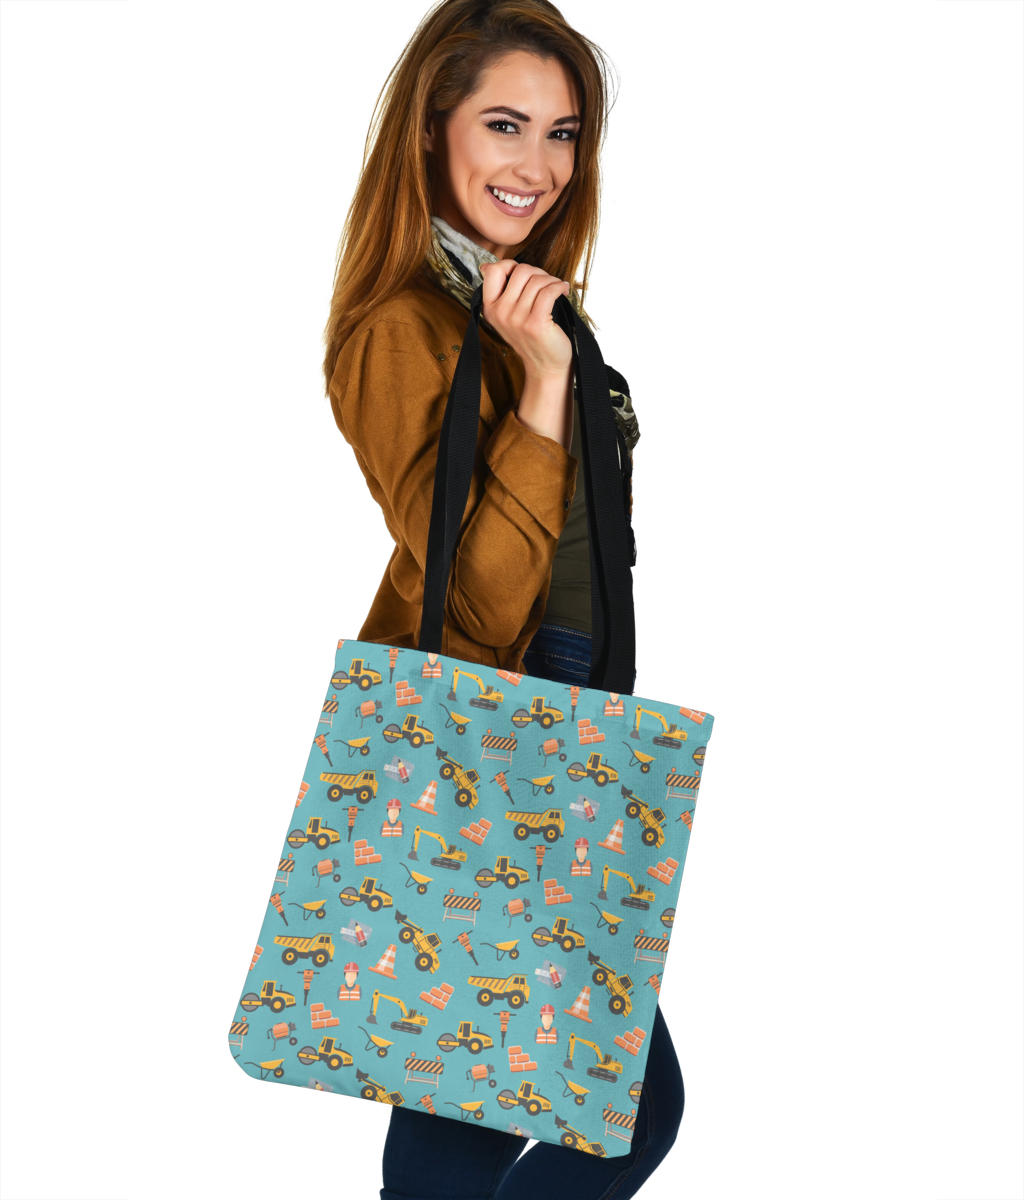 Construction Pattern Cloth Tote